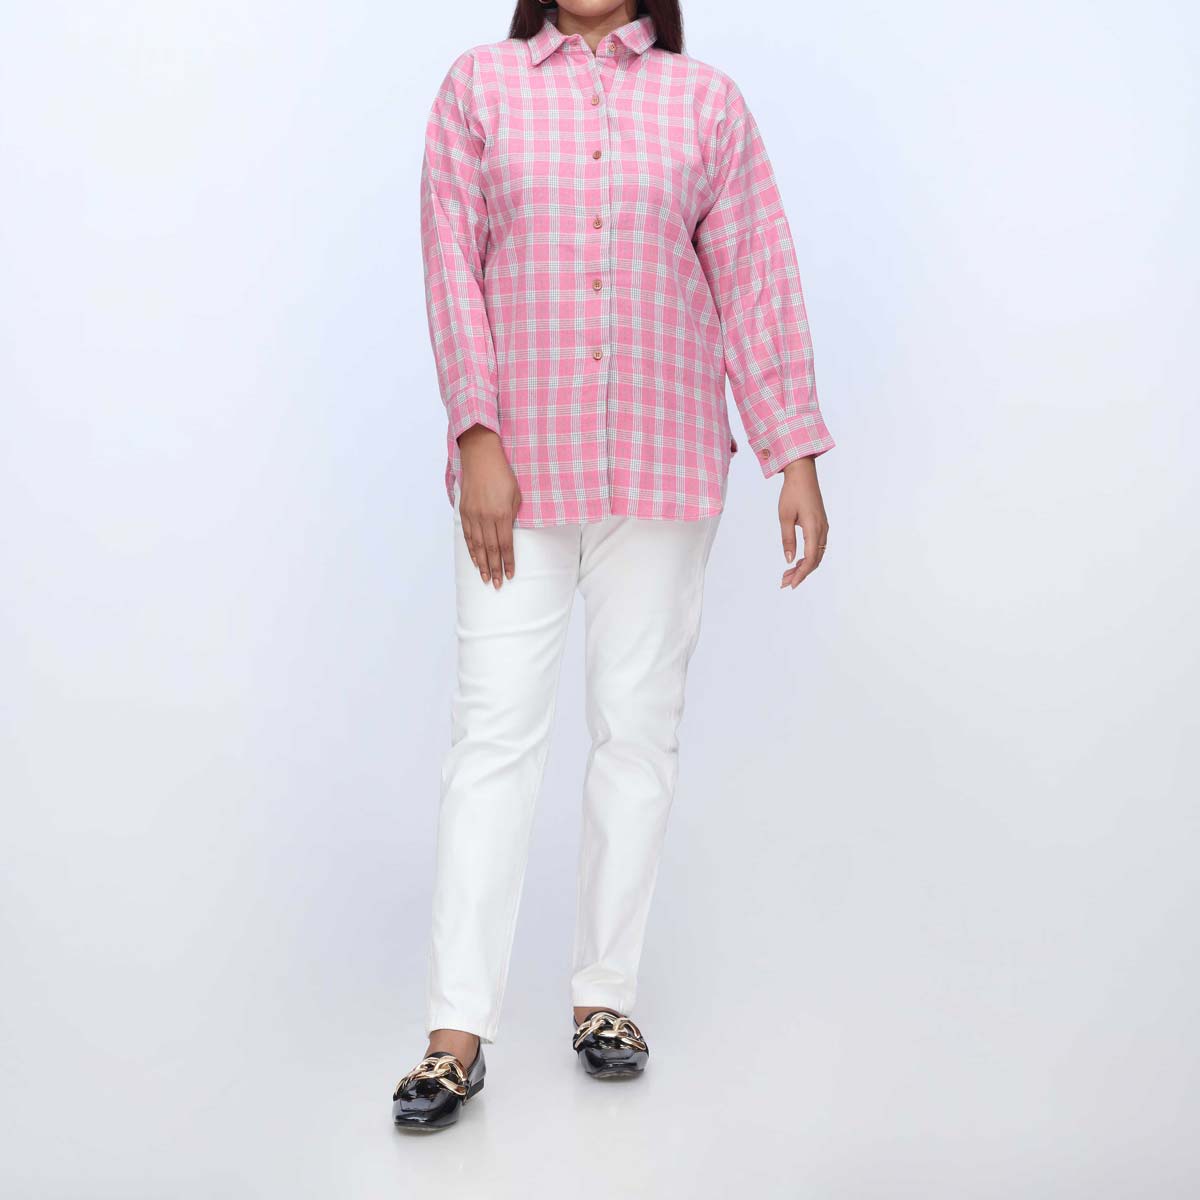 1PC-Flannel Checkered Top PW3072